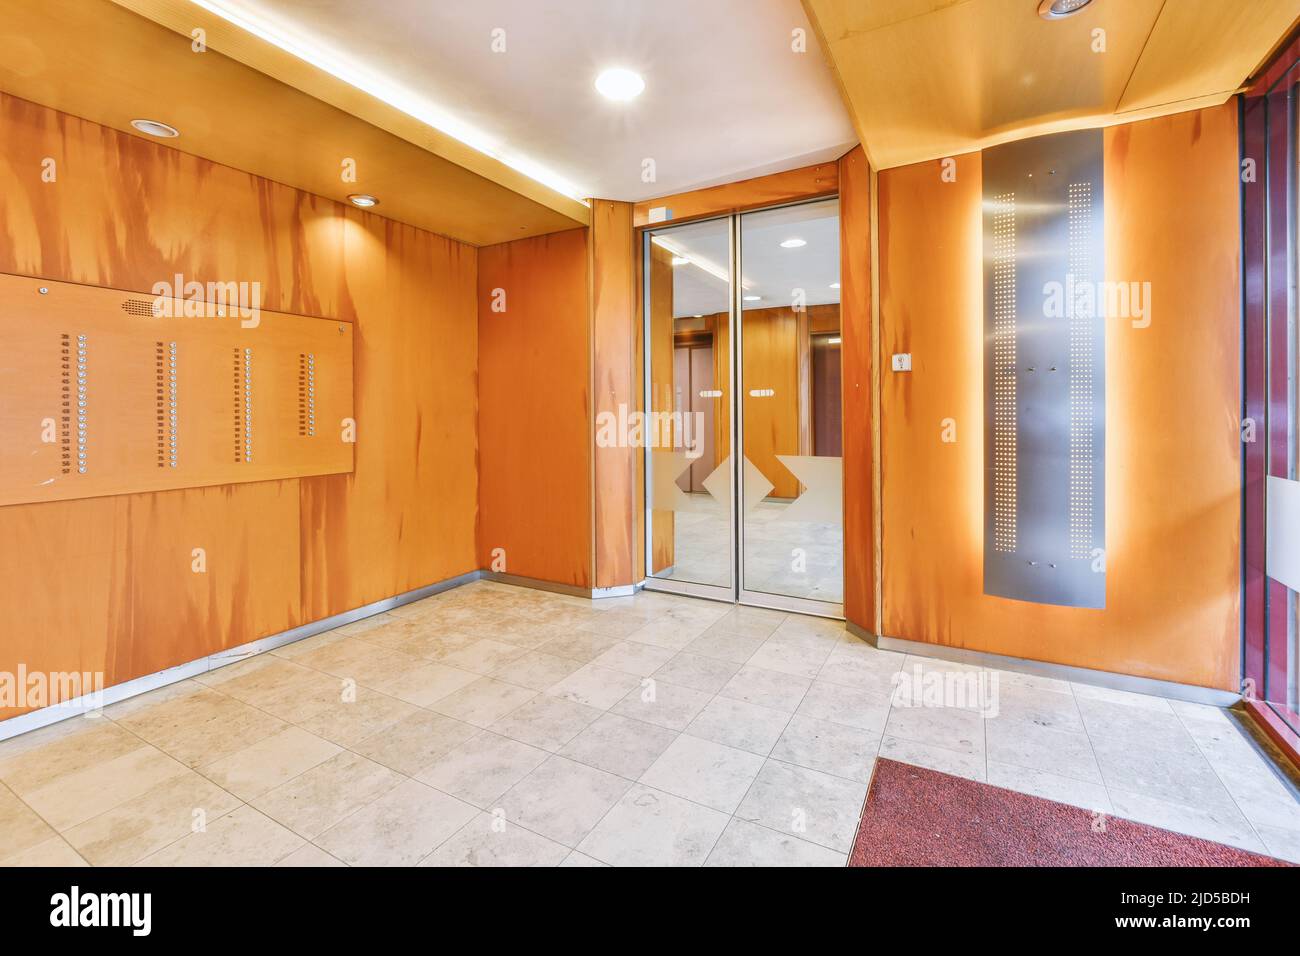 Shiny elevator with opened door located in illuminated hall of contemporary apartment building with tiled floor Stock Photo